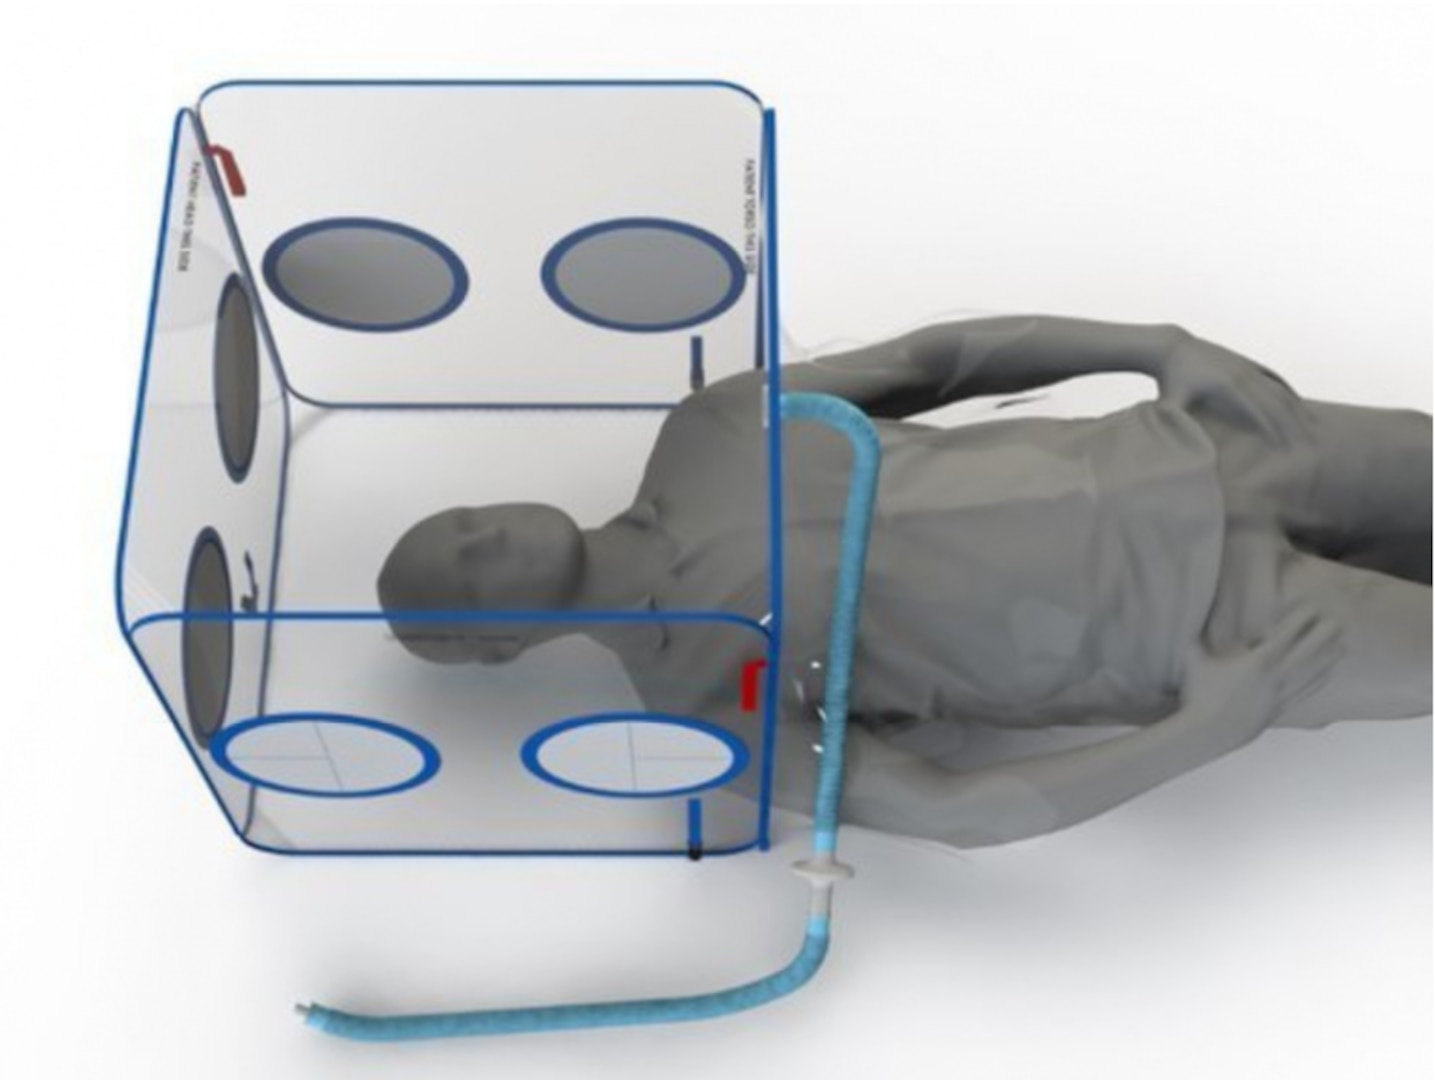 The STAT Enclosure allows medical staff to safely treat and transport critically ill patients while significantly reducing droplets. Photo courtesy of Olifant Medical.